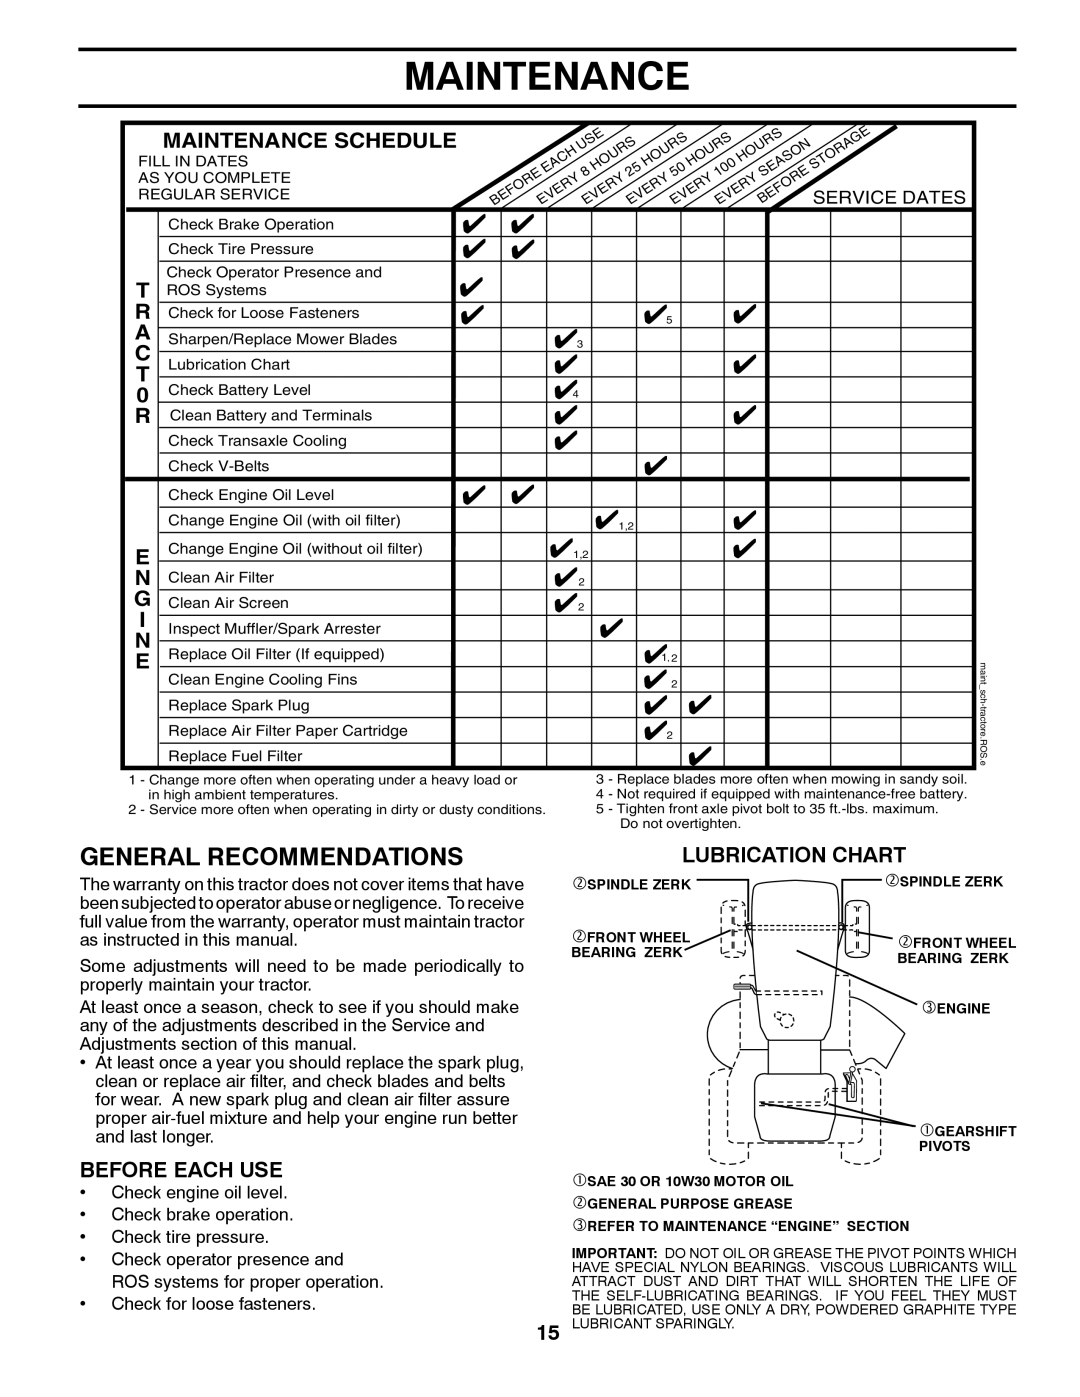 Poulan PO18542LT General Recommendations, Maintenance Schedule, Before Each Use, Lubrication Chart, Service Dates 